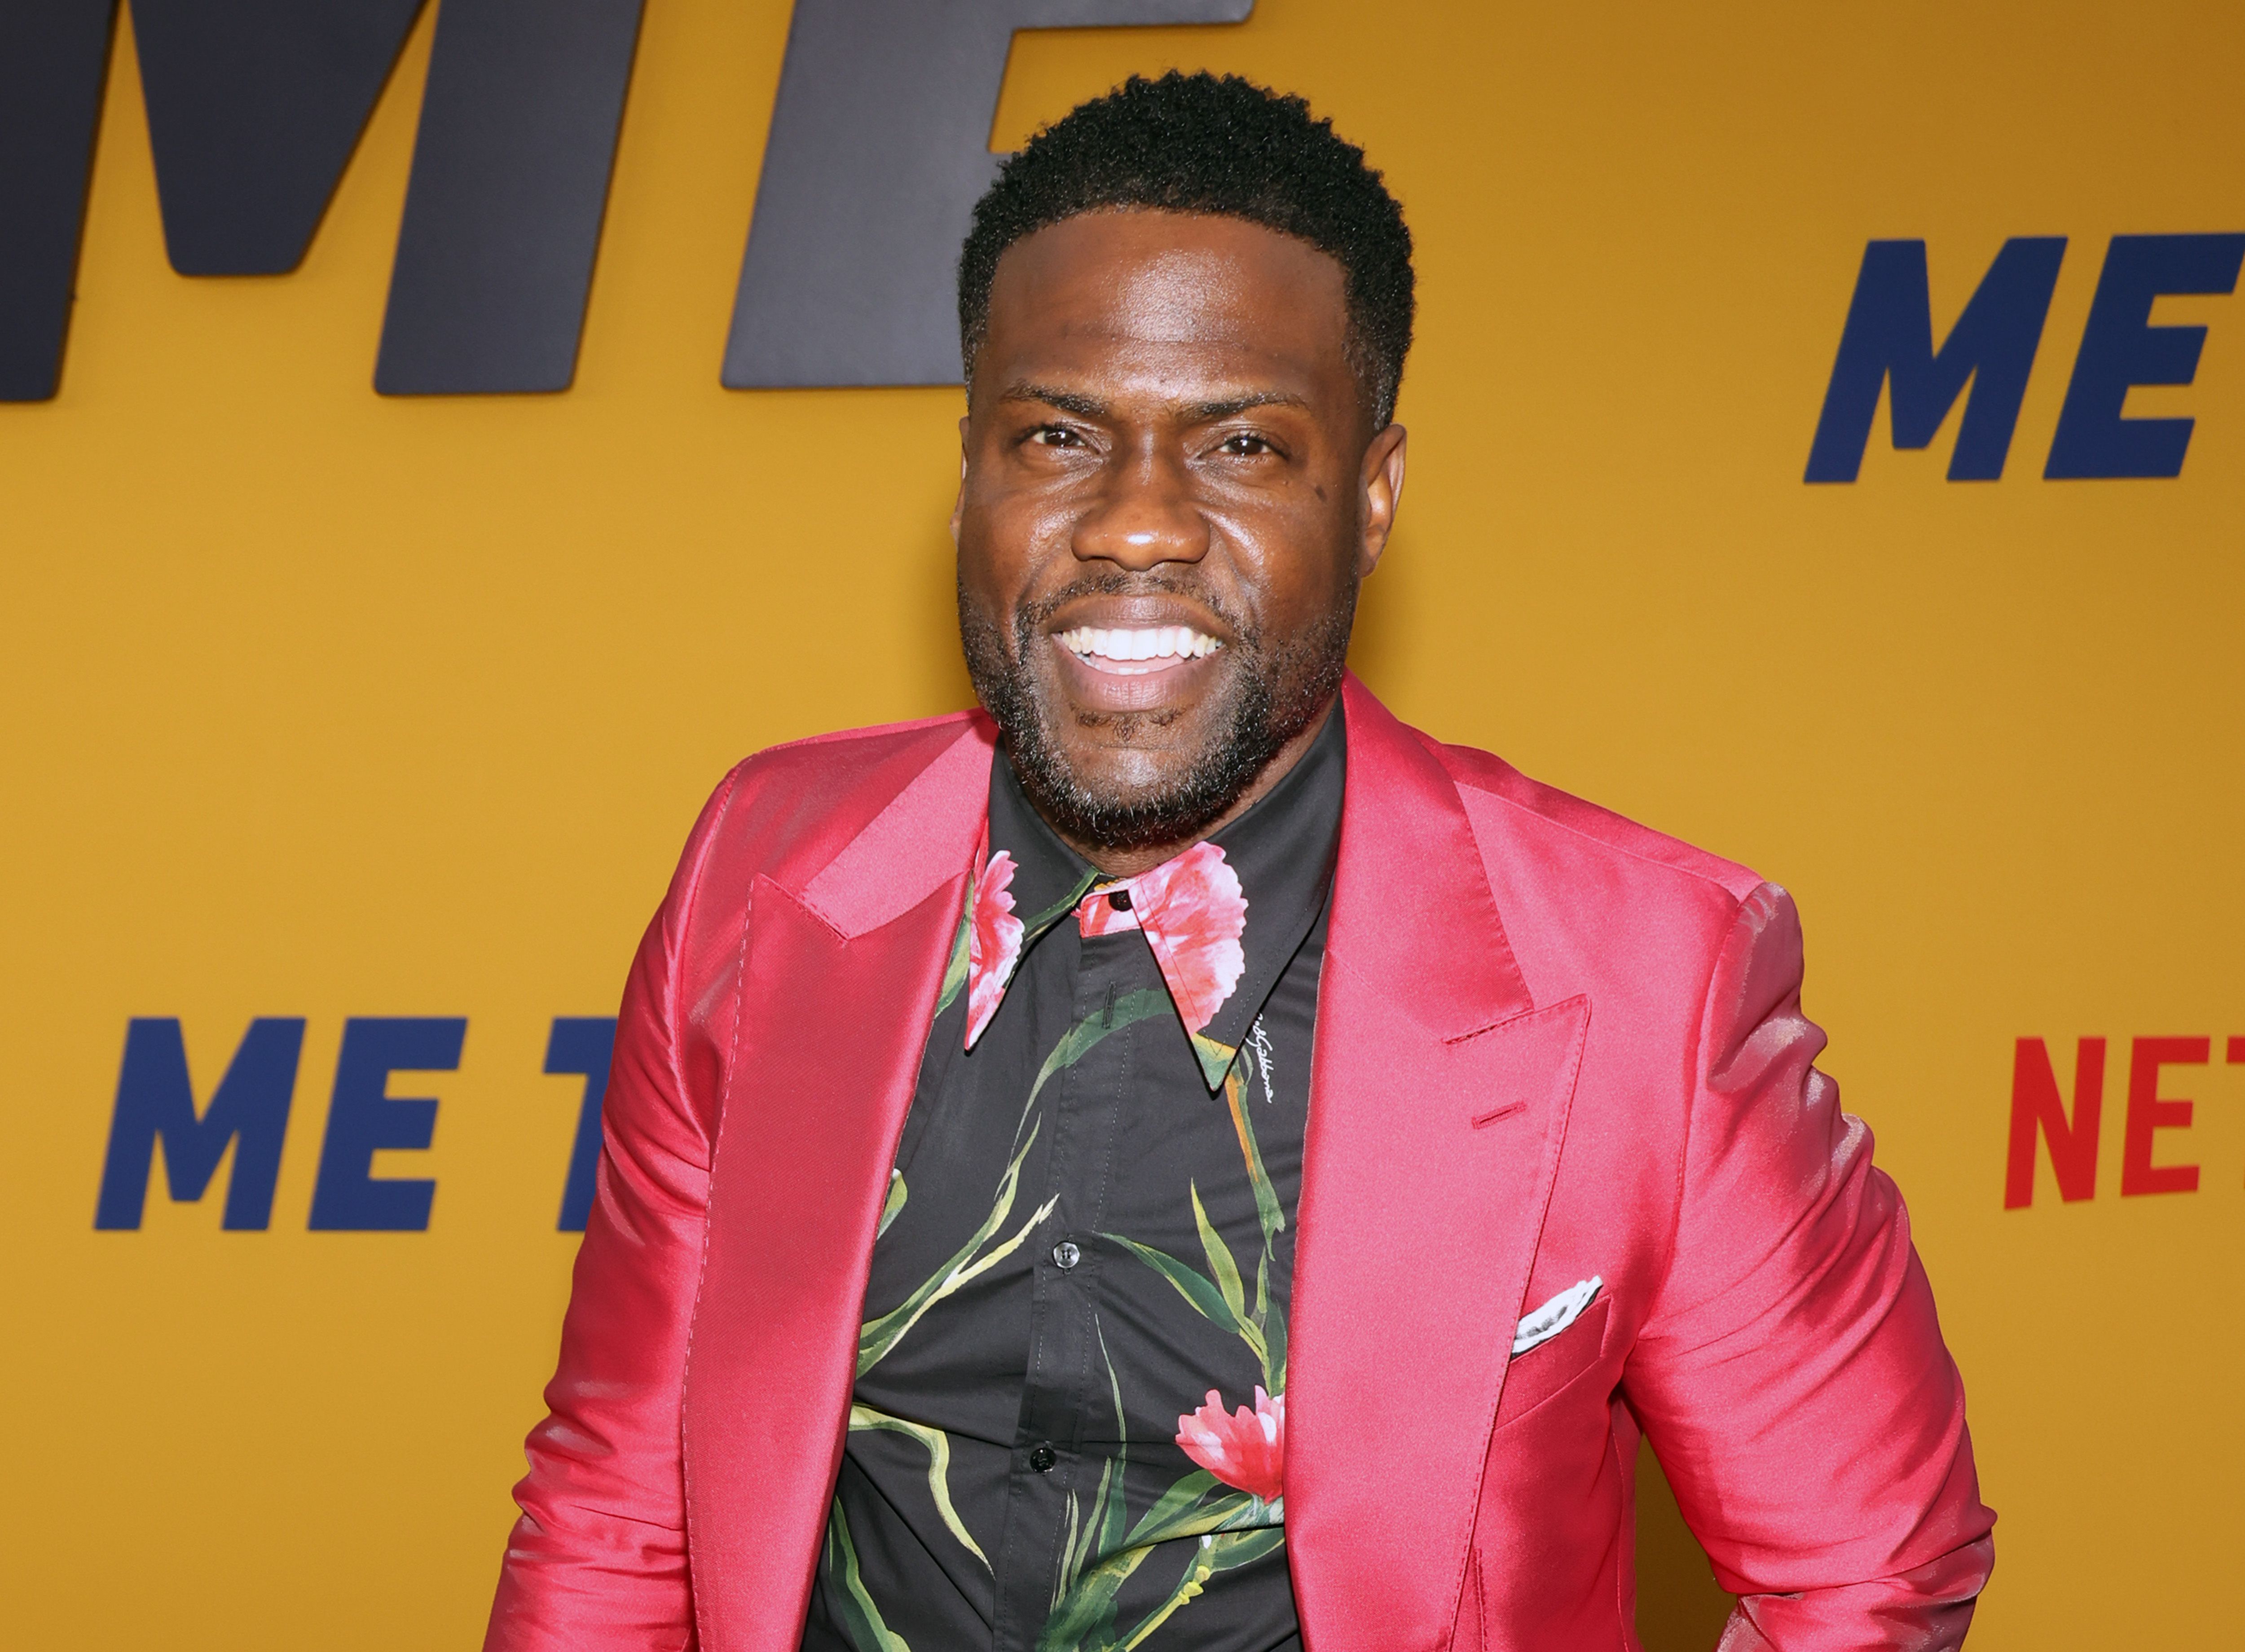 Kevin Hart. who bought two mansions right next door to each other, smiling on the red carpet of the Los Angeles premiere of Netflix's 'Me Time'